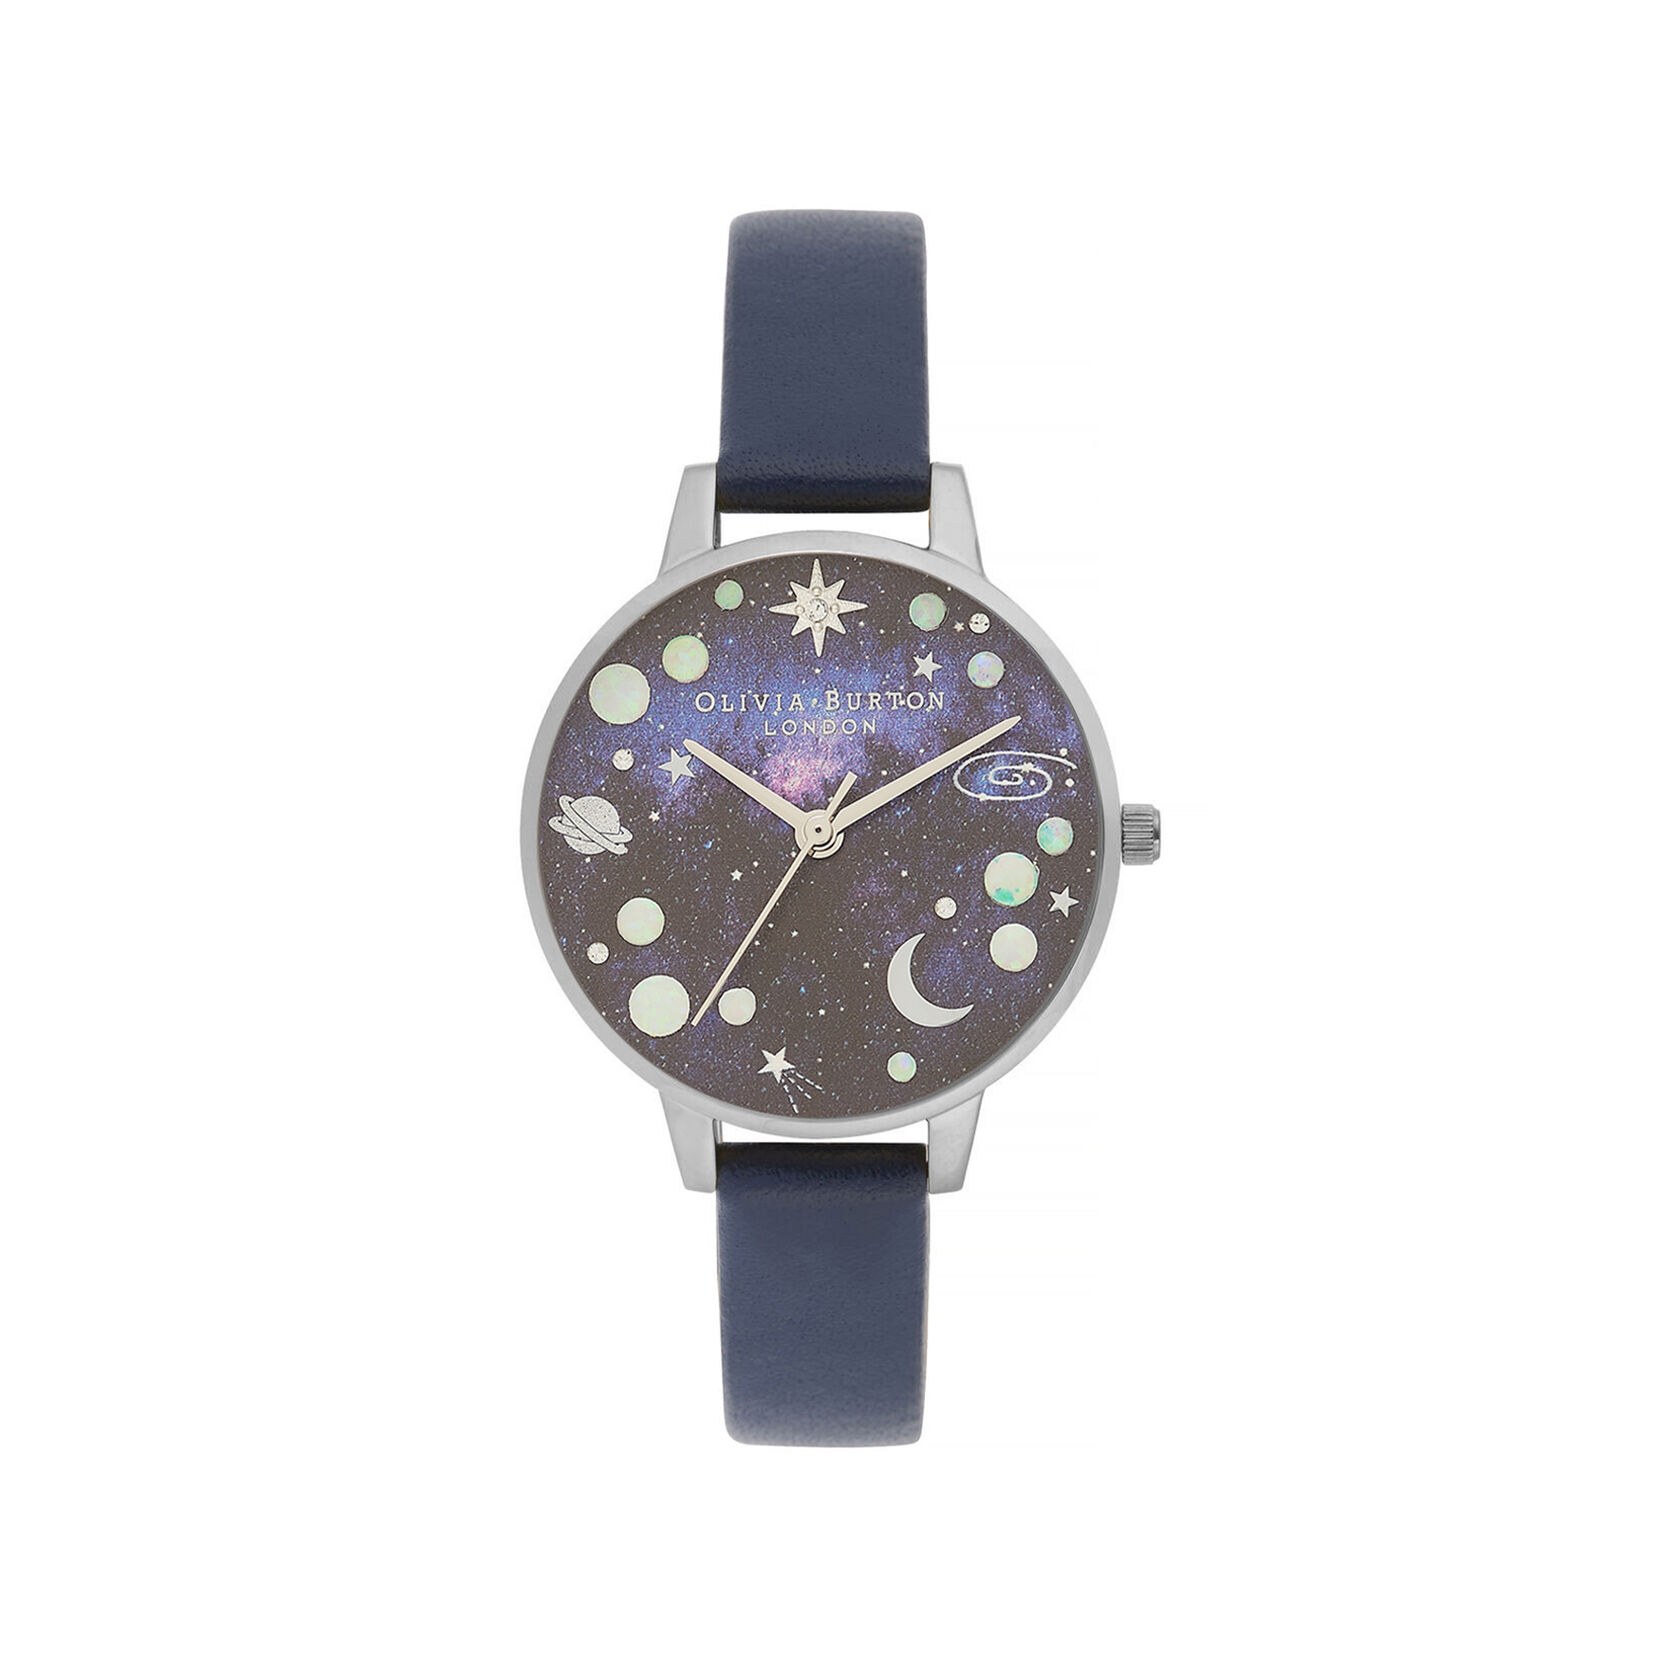 30mm Silver & Blue Leather Strap Watch